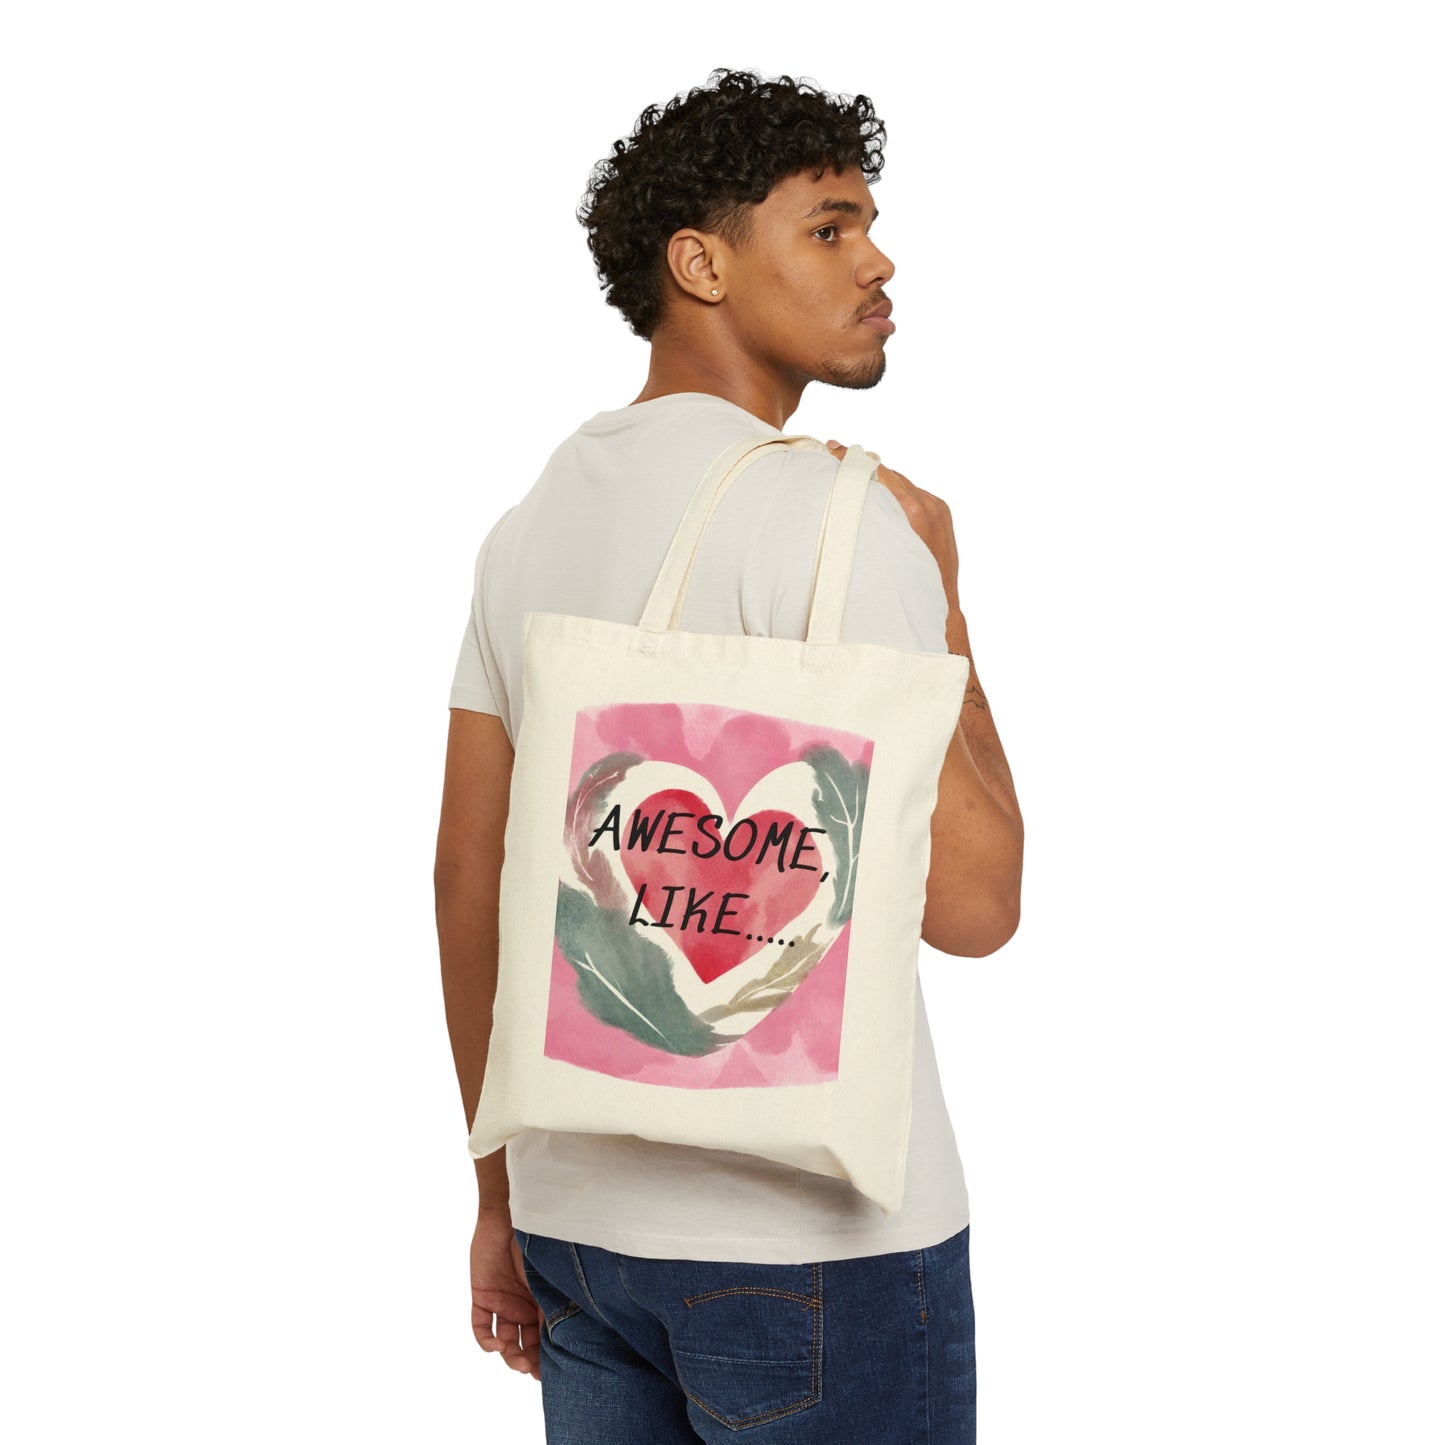 AWESOME, LIKE  GRAPHIC TOTE BAG GIFT